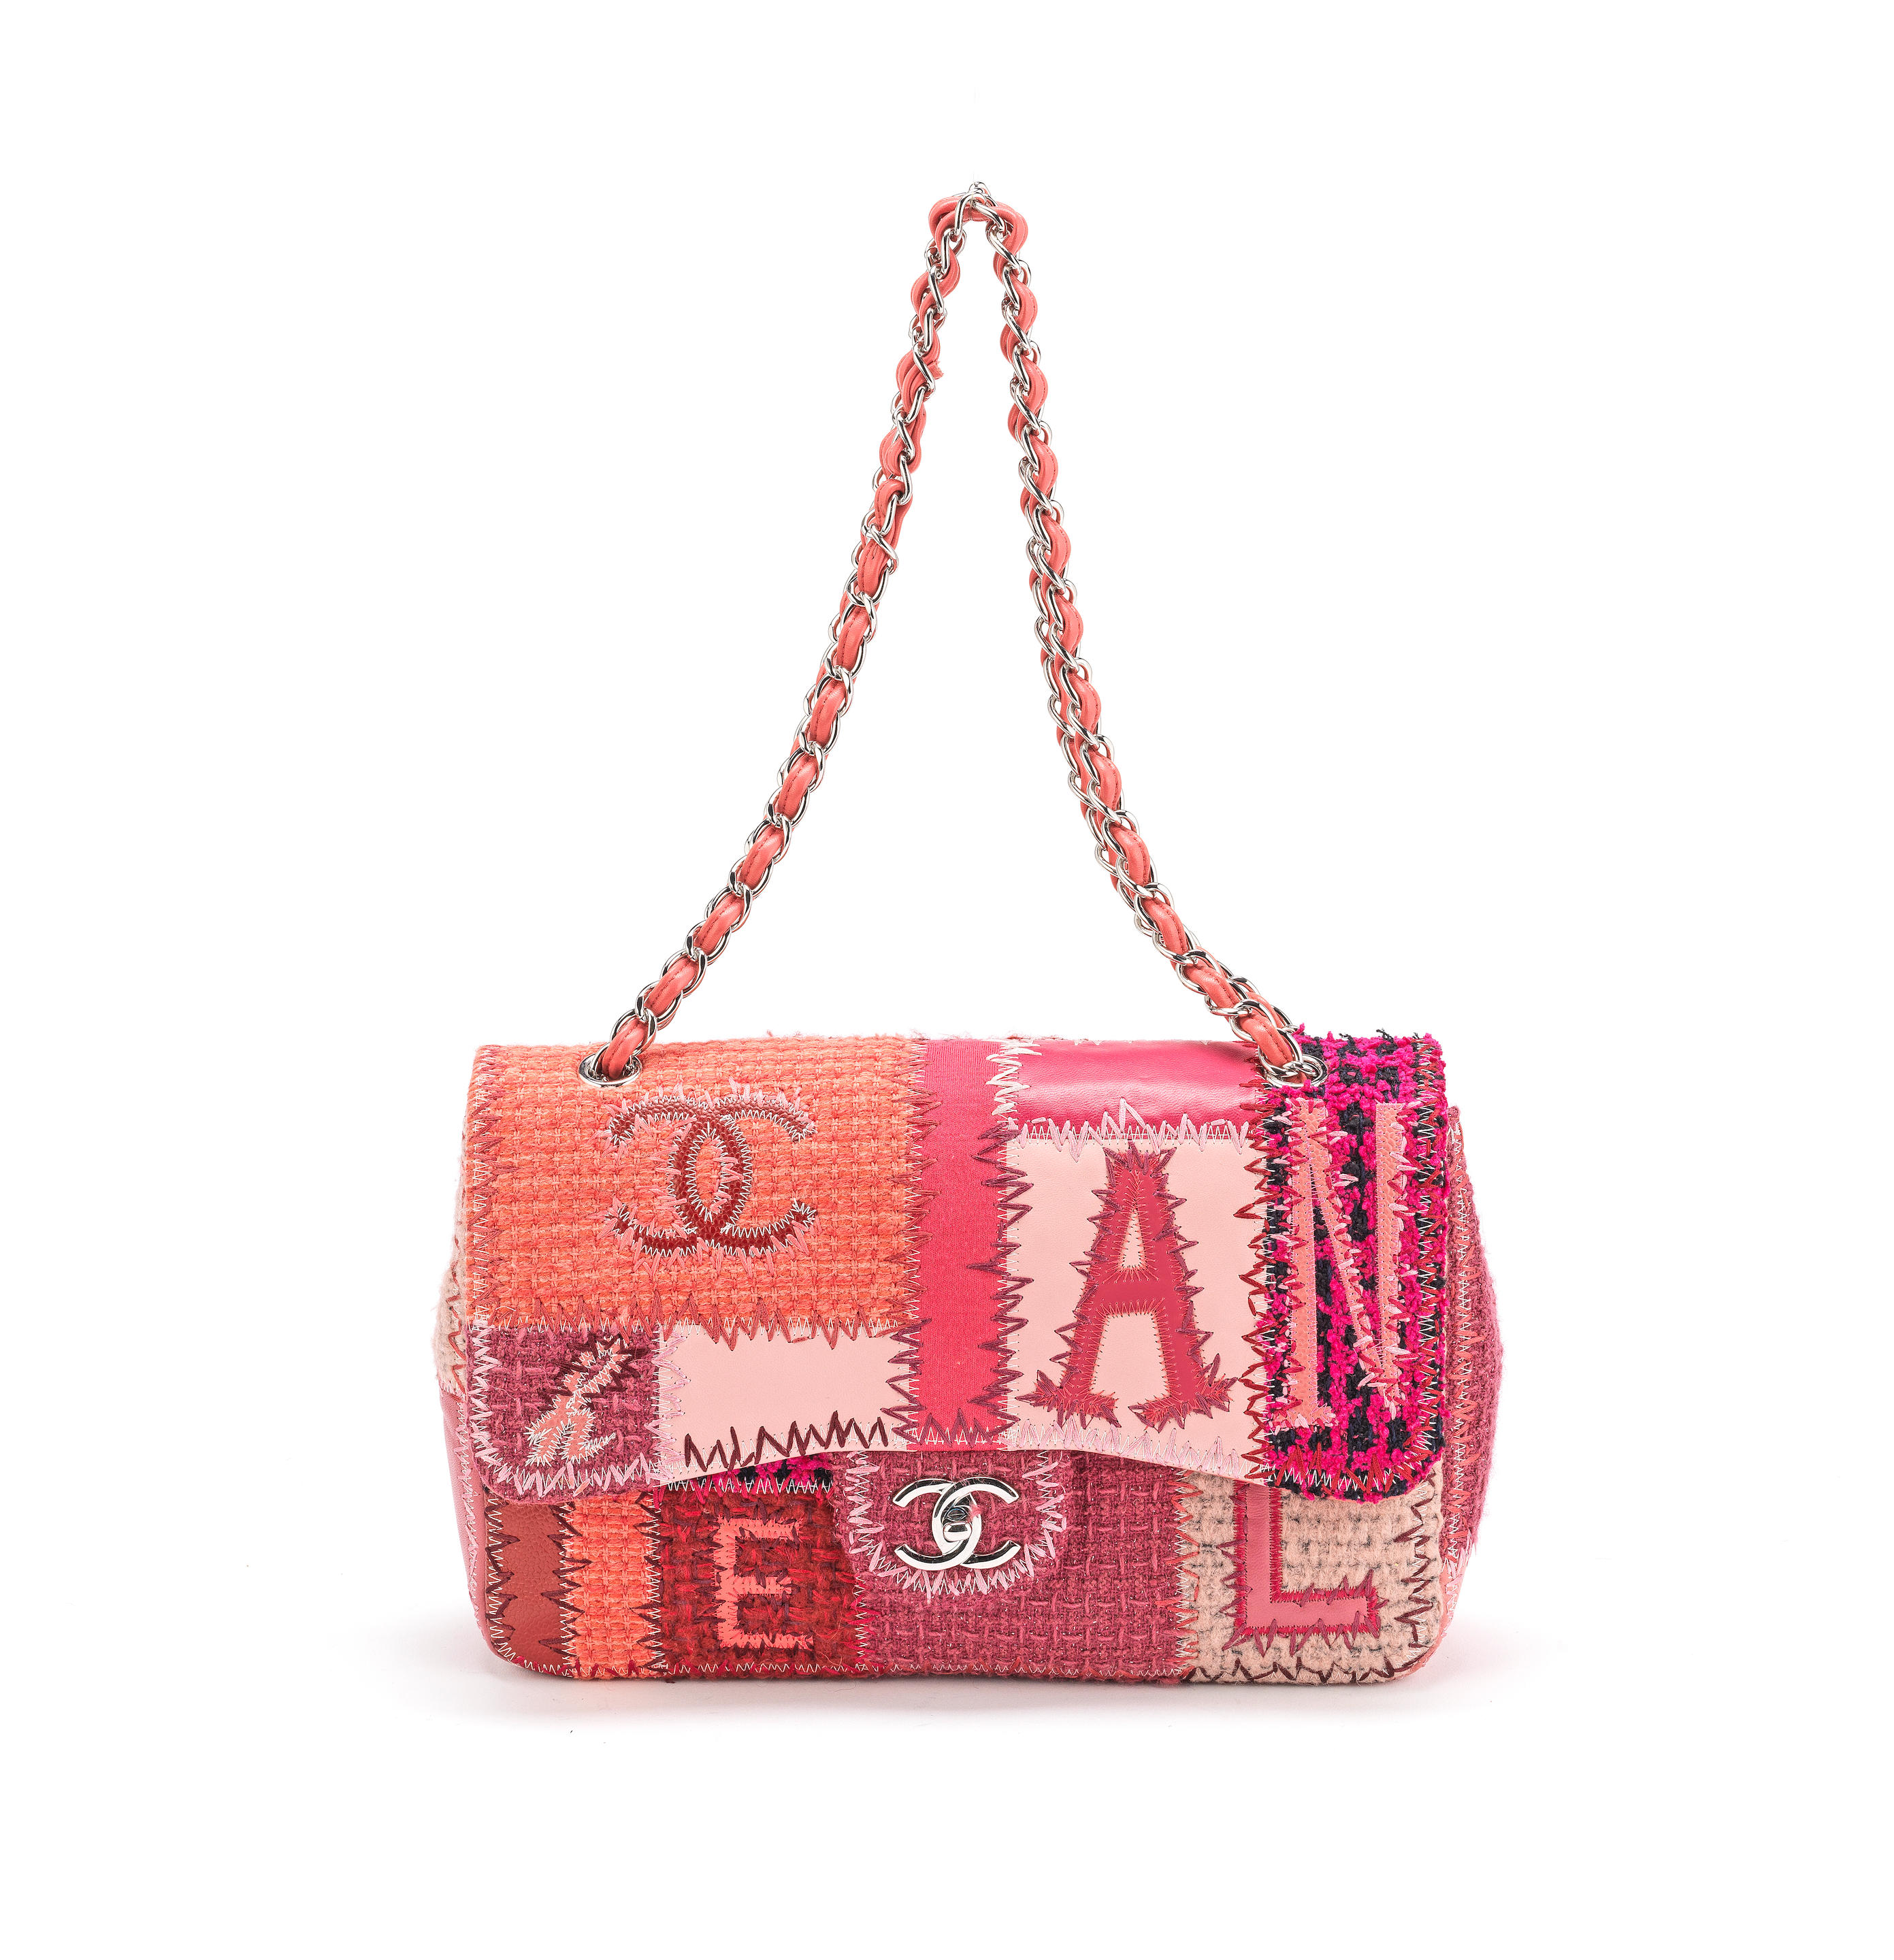 Buy Chanel Classic Single Flap Bag Patchwork Tweed and 2666001